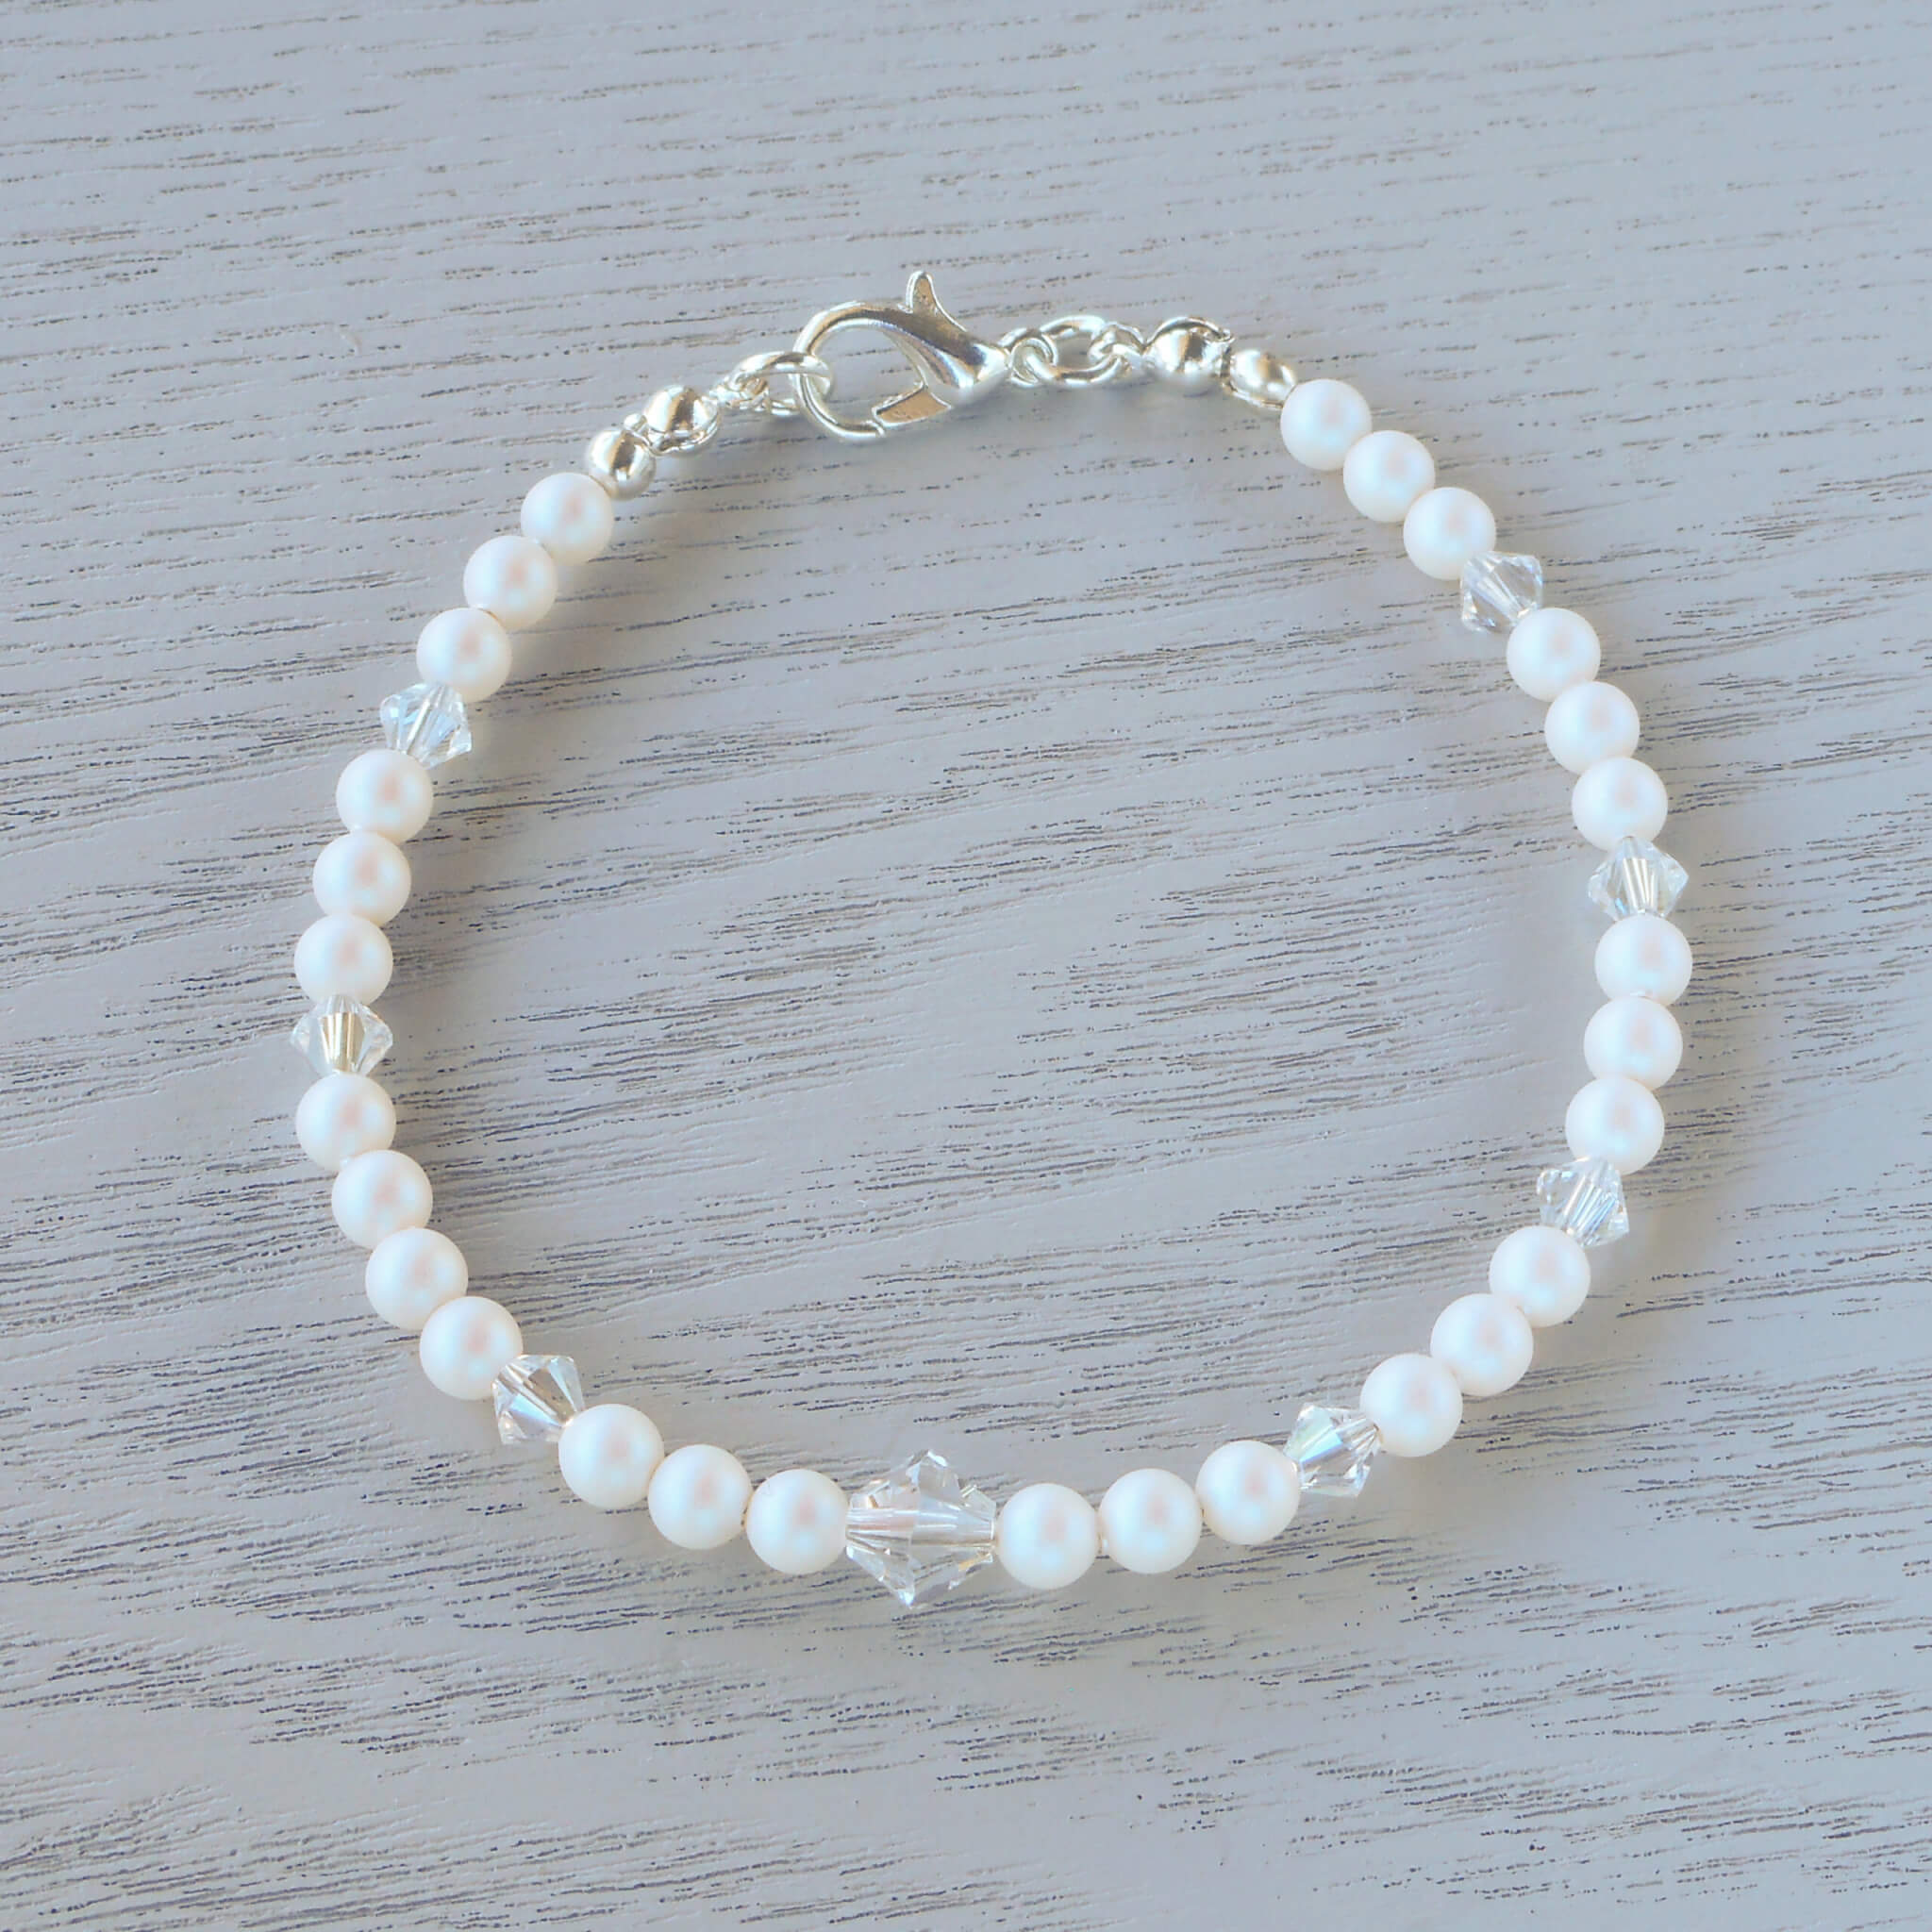 Valentina Glass Crystal Bracelet Sets of Pearlescent White Swarovski pearls are separated by Swarovski crystal in Crystal Moonlight which